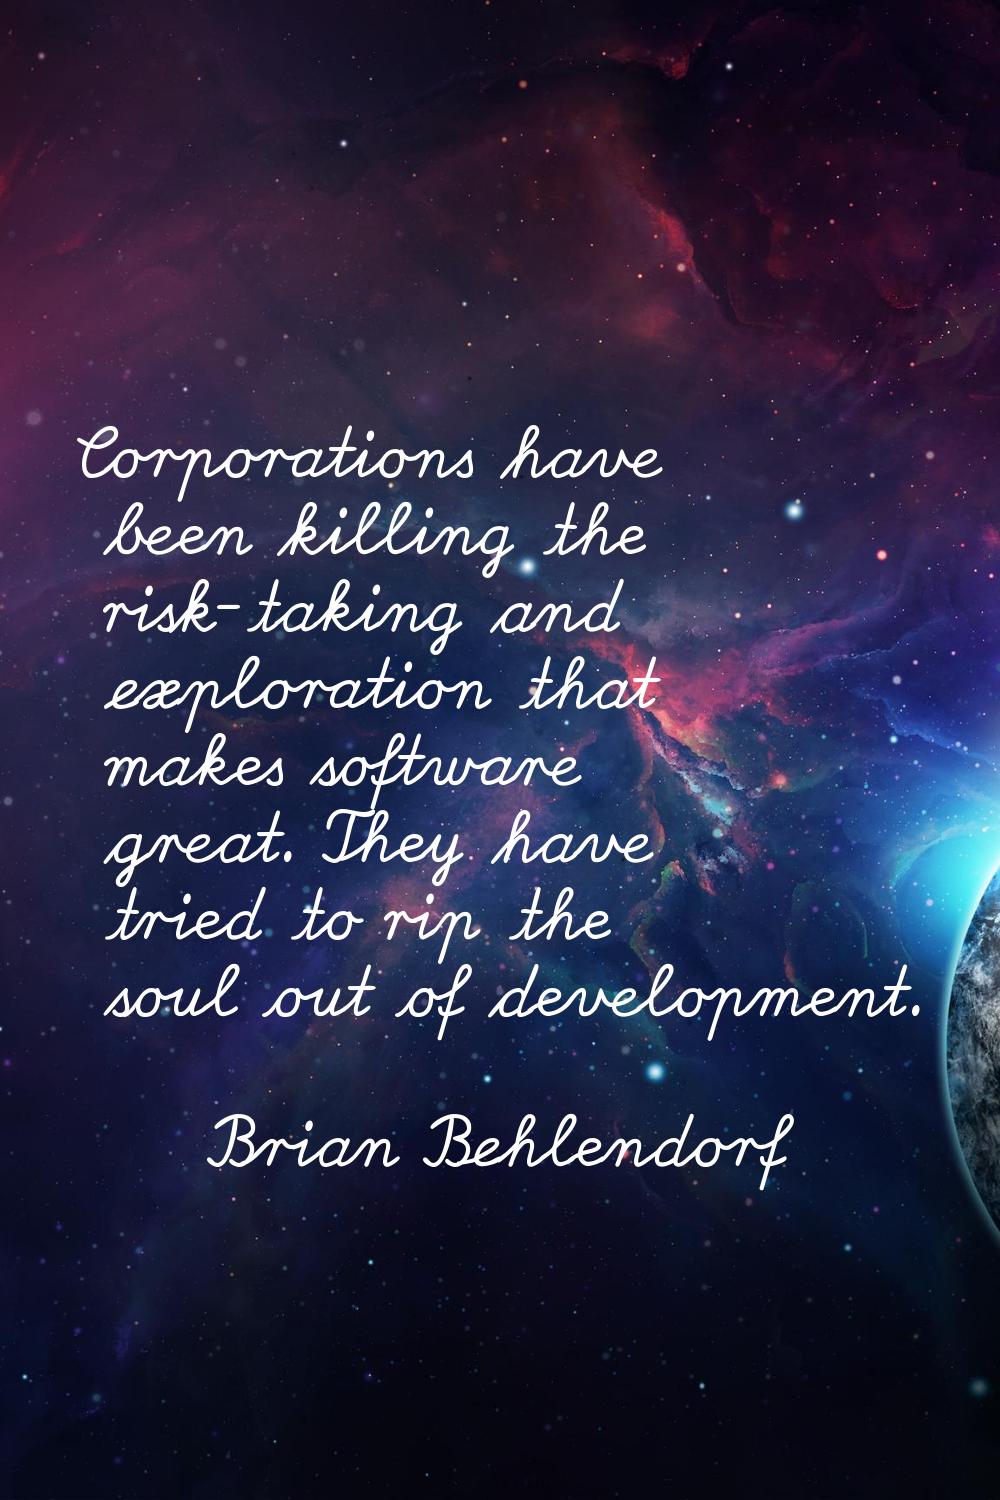 Corporations have been killing the risk-taking and exploration that makes software great. They have